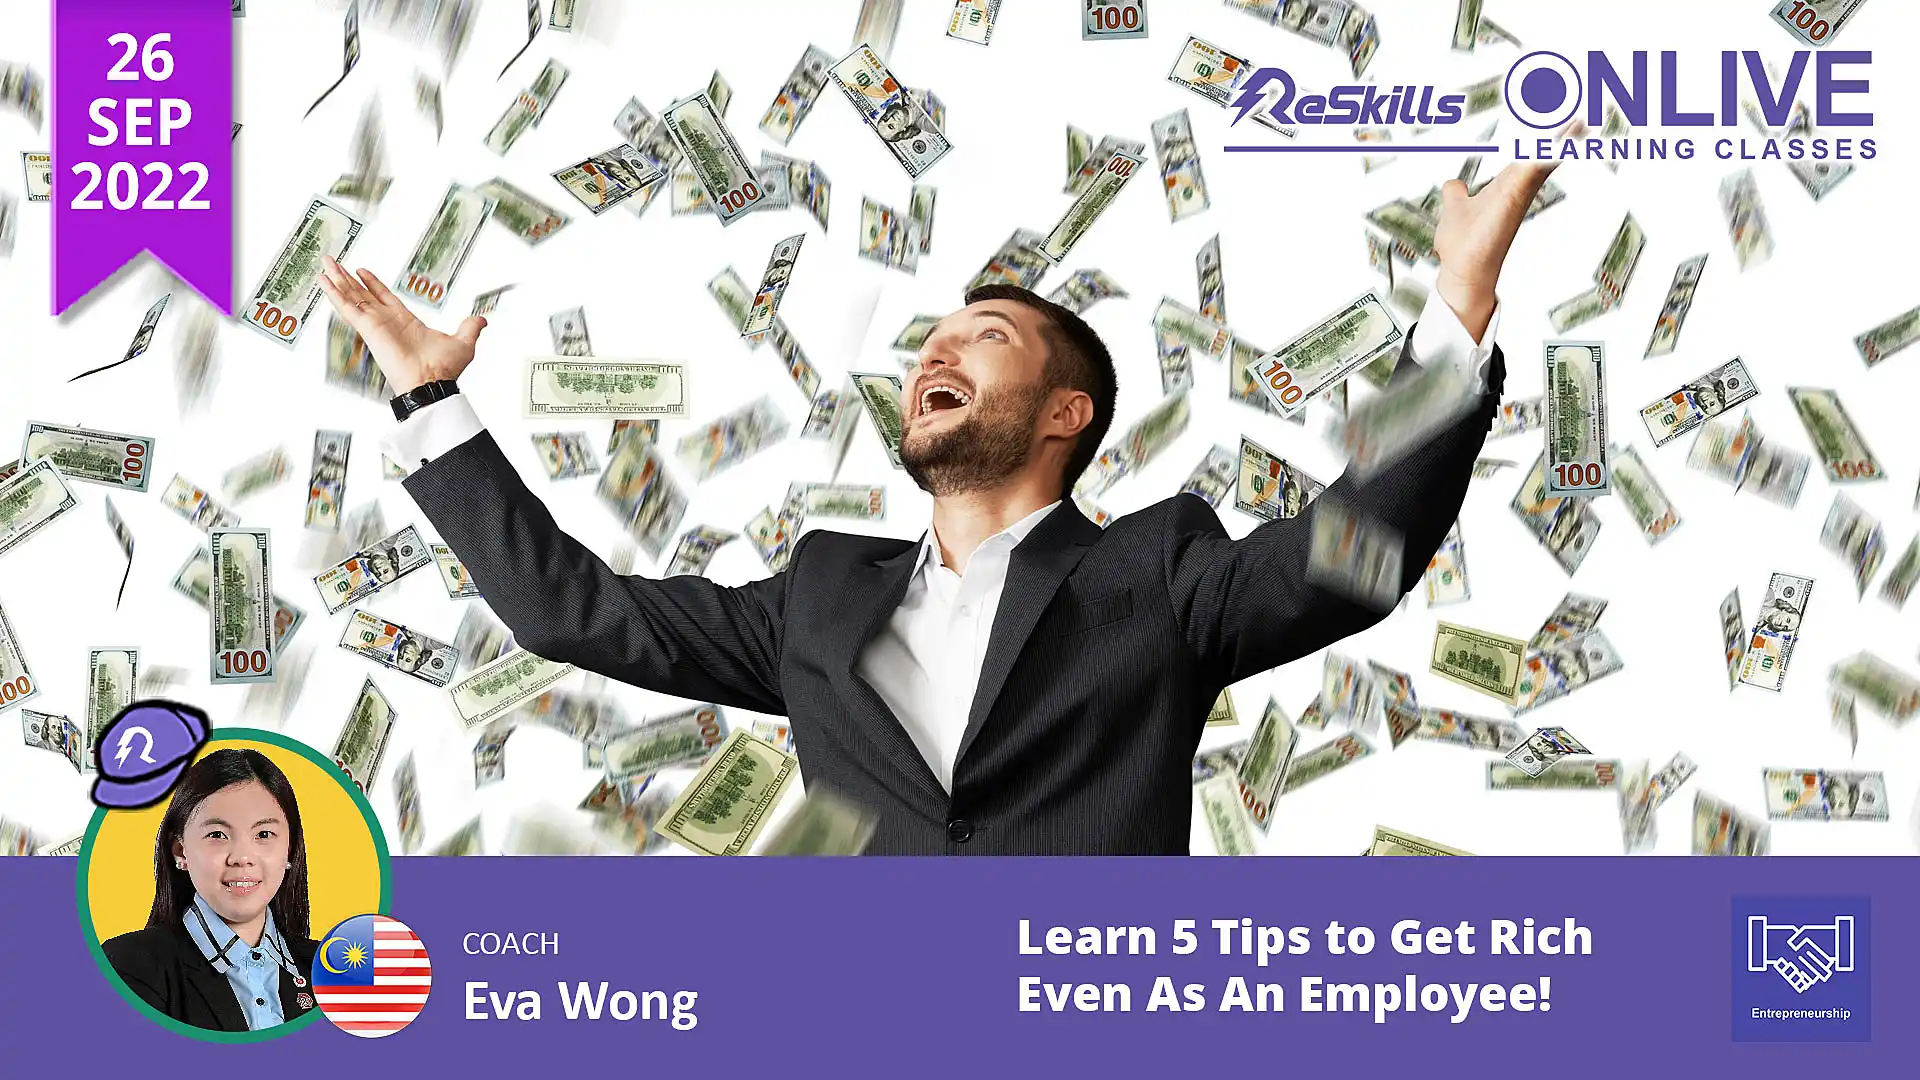 Learn 5 Tips to Get Rich Even As An Employee! - ReSkills